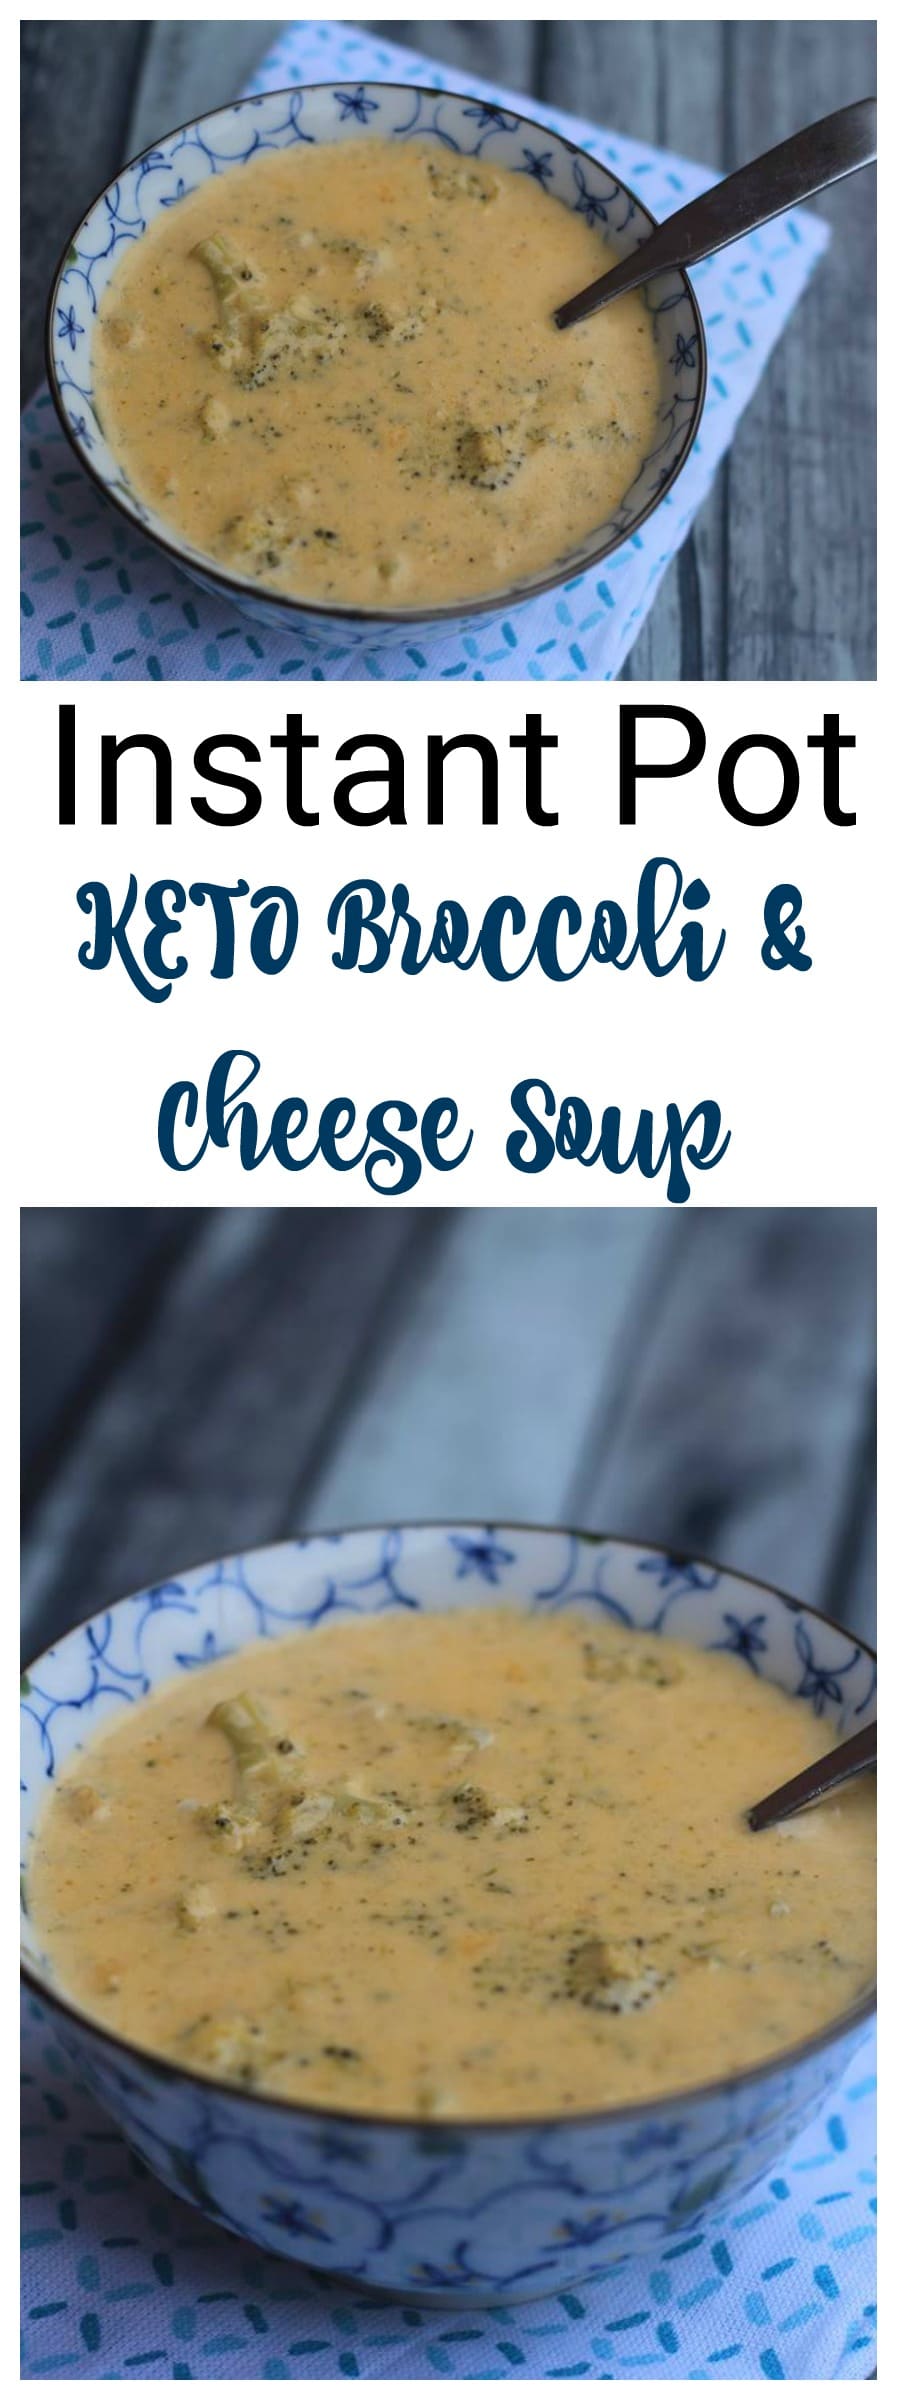 Instant Pot Keto Broccoli Cheese Soup is an easy meal that you will love making for your family. The Instant Pot cuts back on the time spent in the kitchen making this a perfect keto soup recipe!